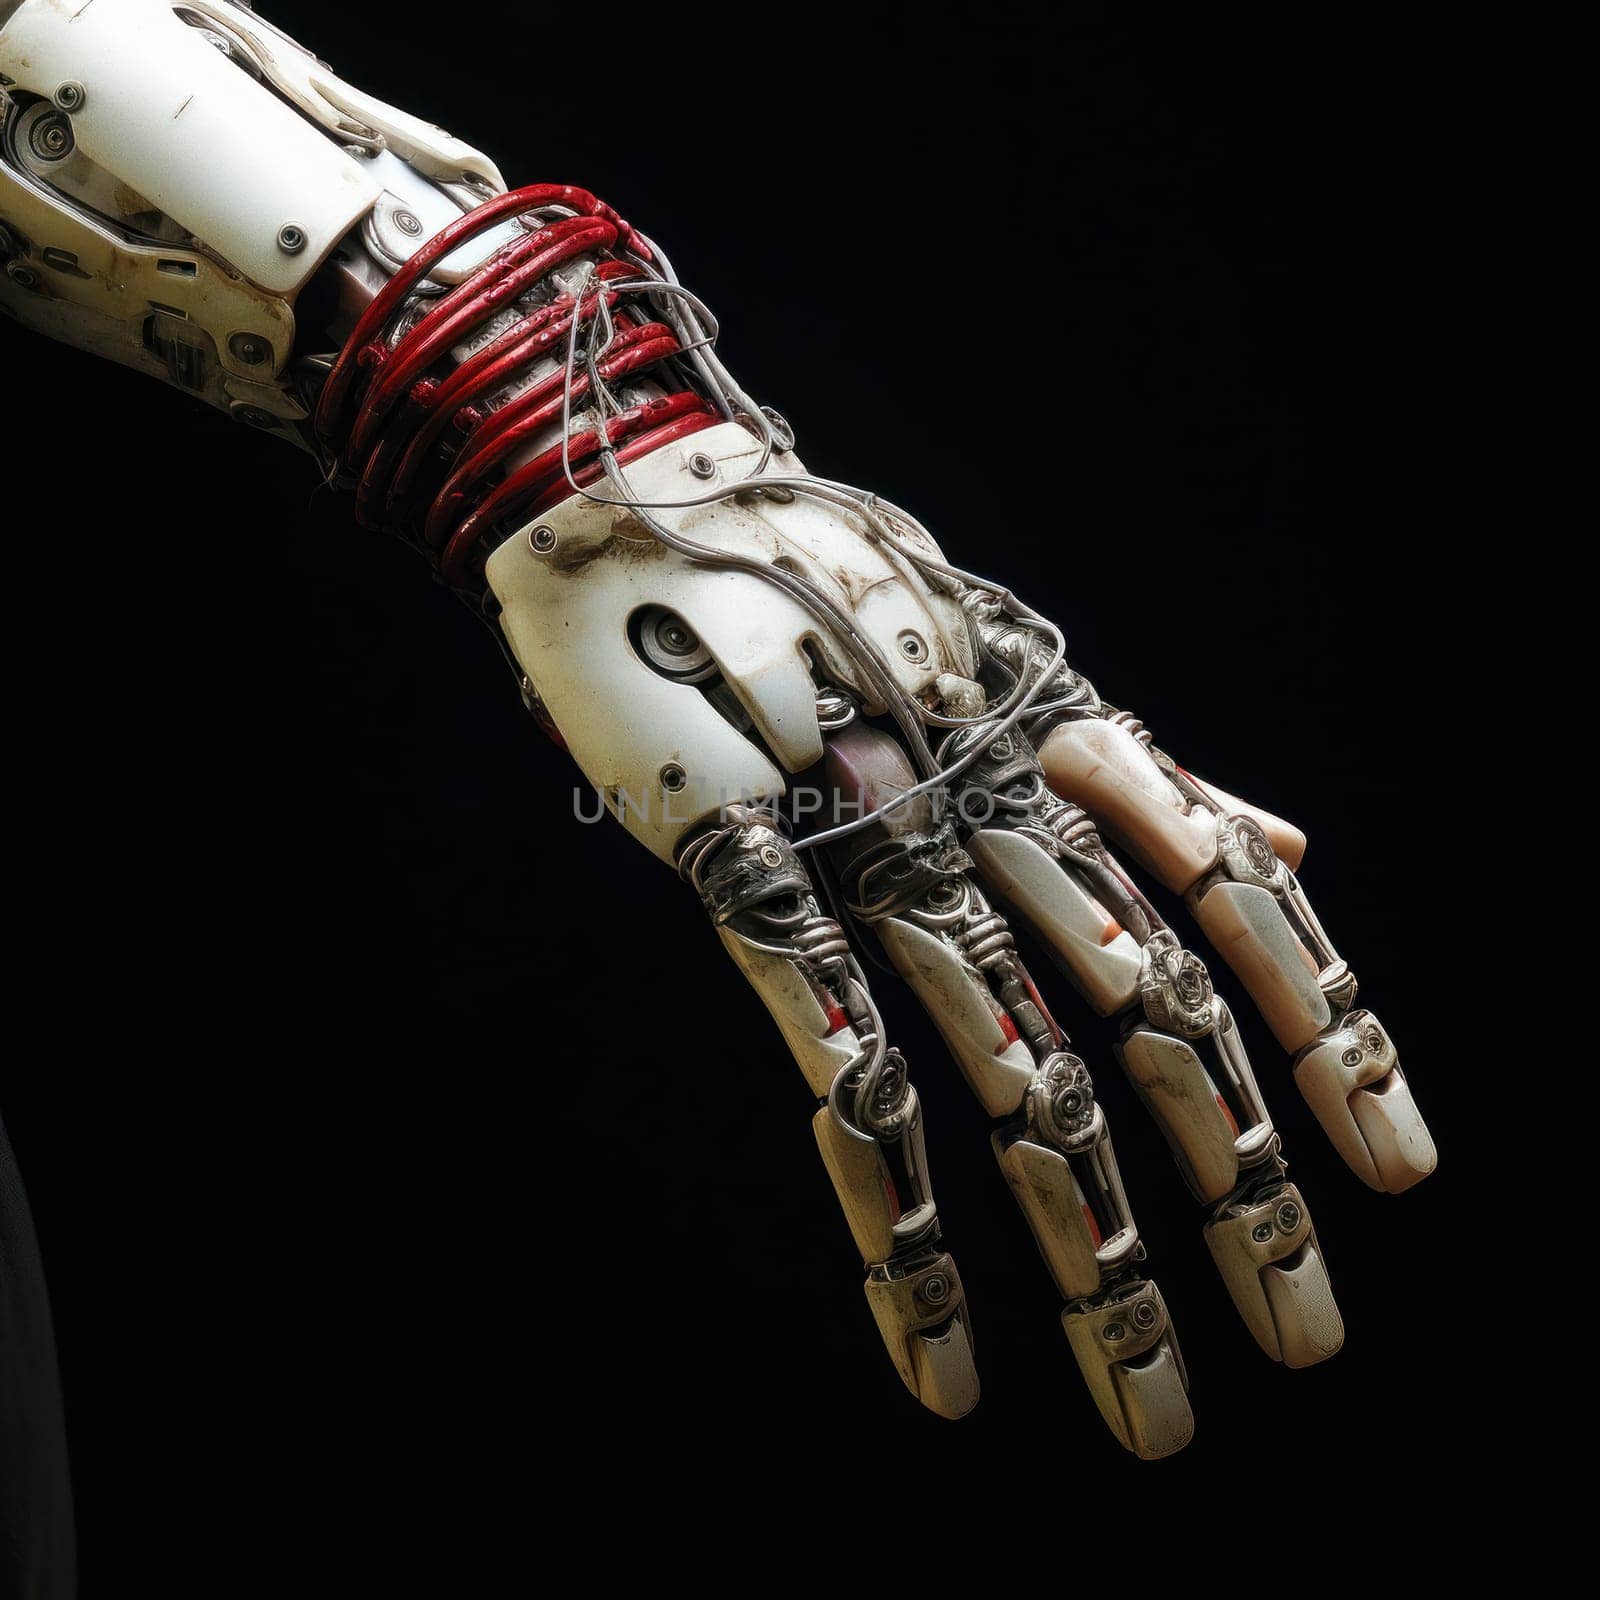 Machine-arm, state-of-the-art technology in detail, prosthetic hand by Yurich32